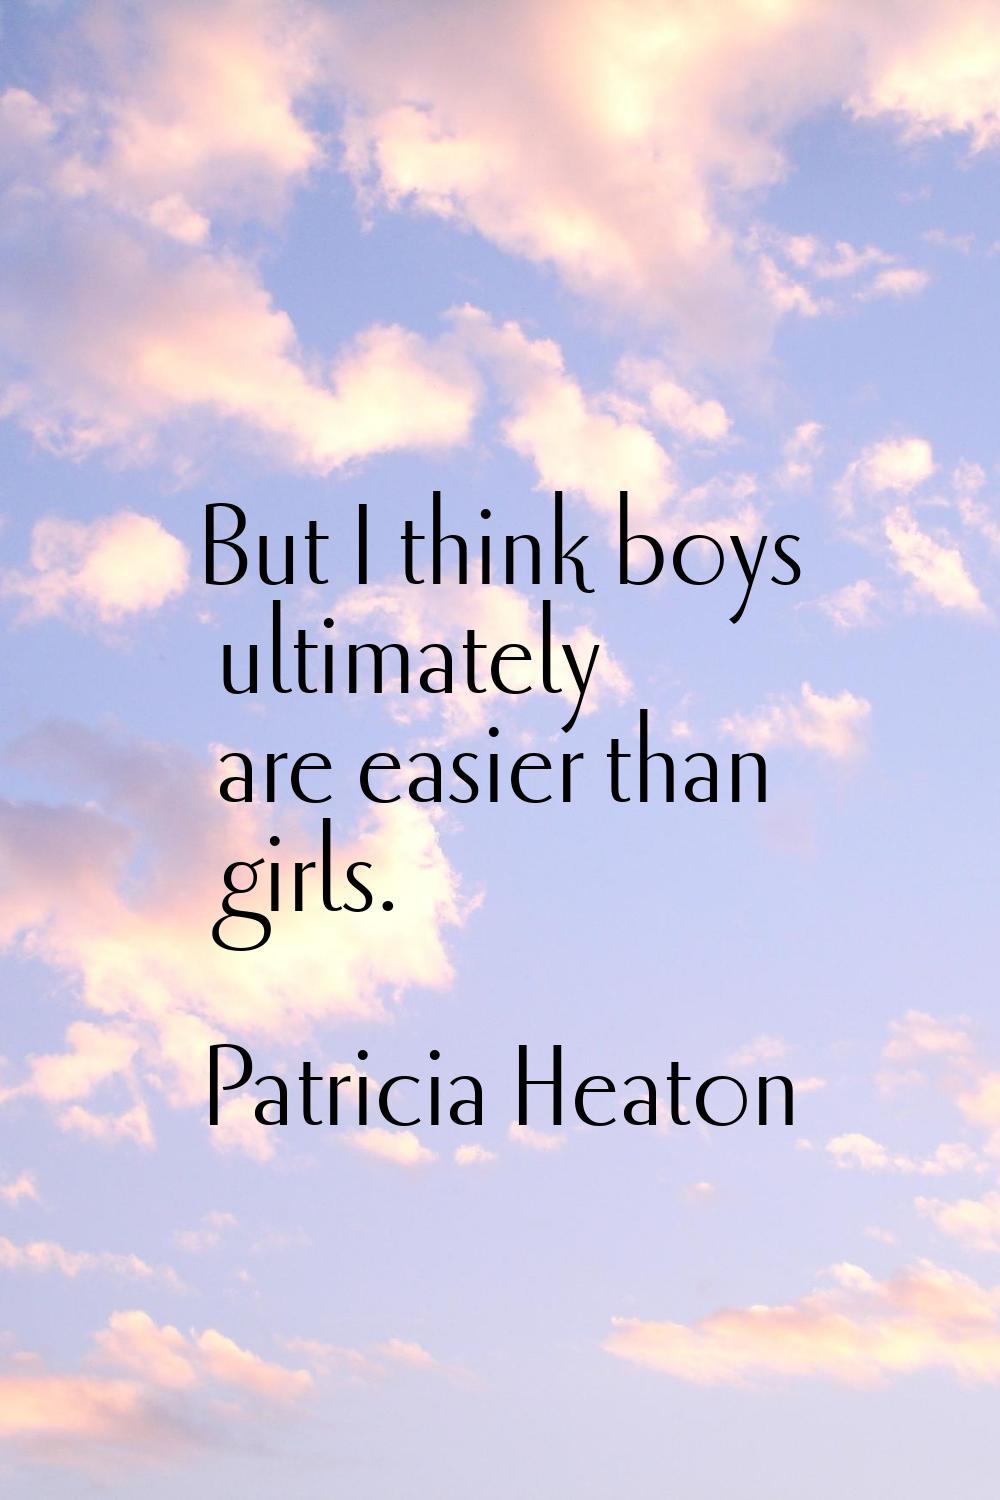 But I think boys ultimately are easier than girls.